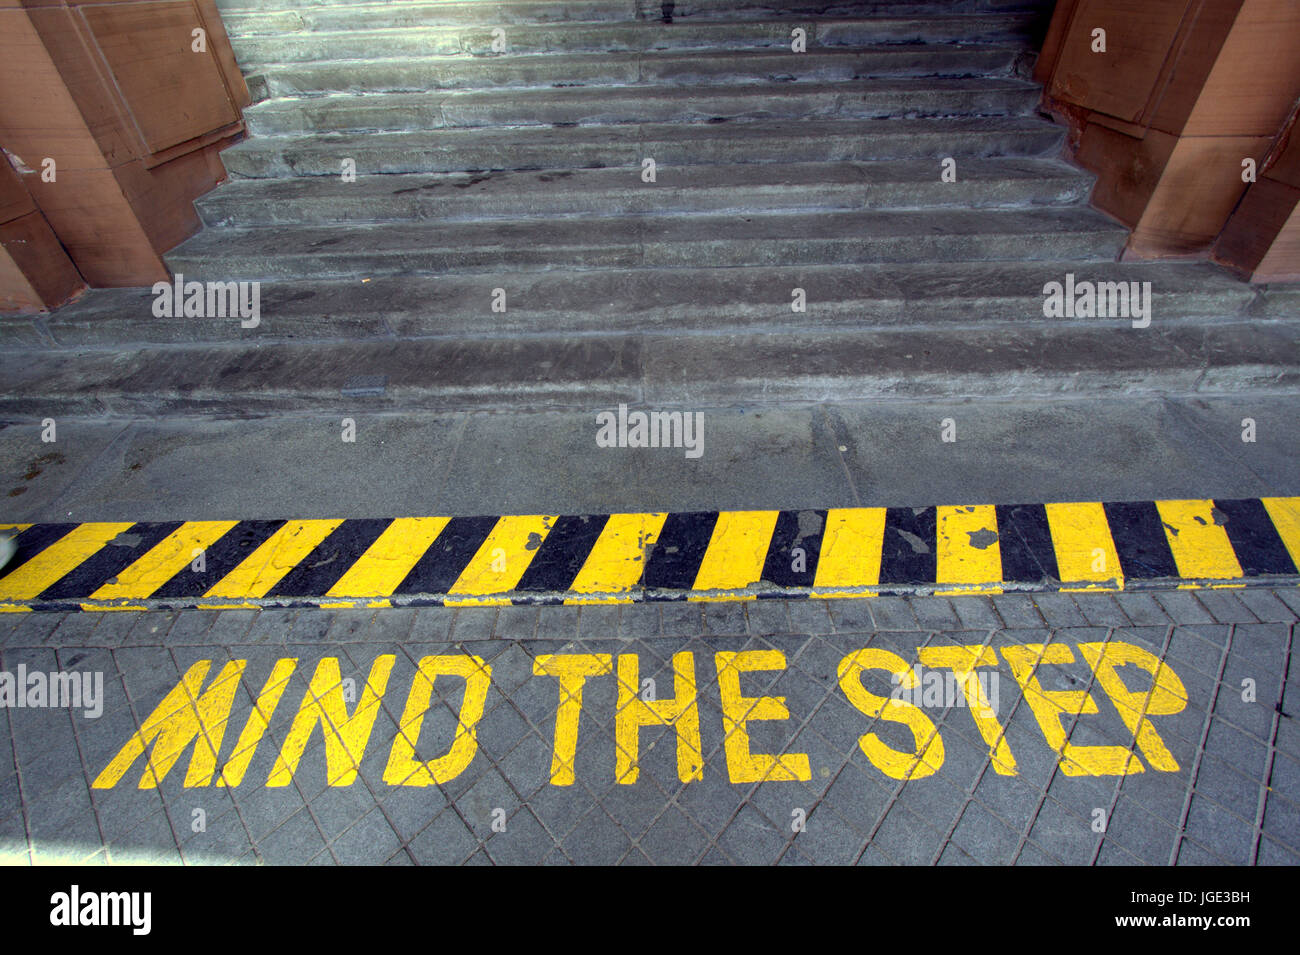 mind the step sign on stairs Stock Photo